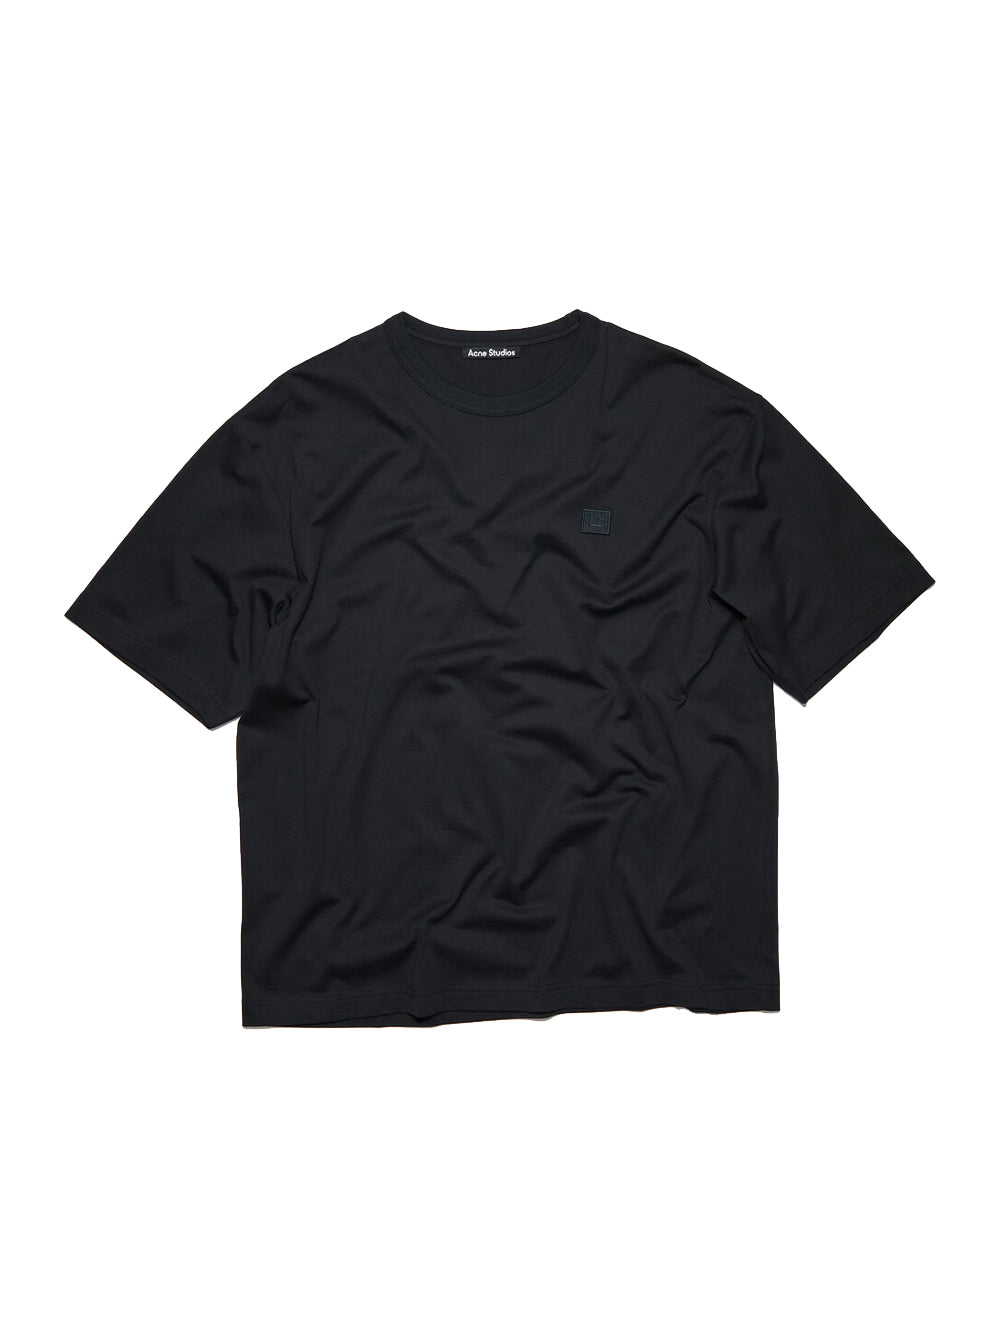 Relaxed Fit Crew Neck T-Shirts (Black)